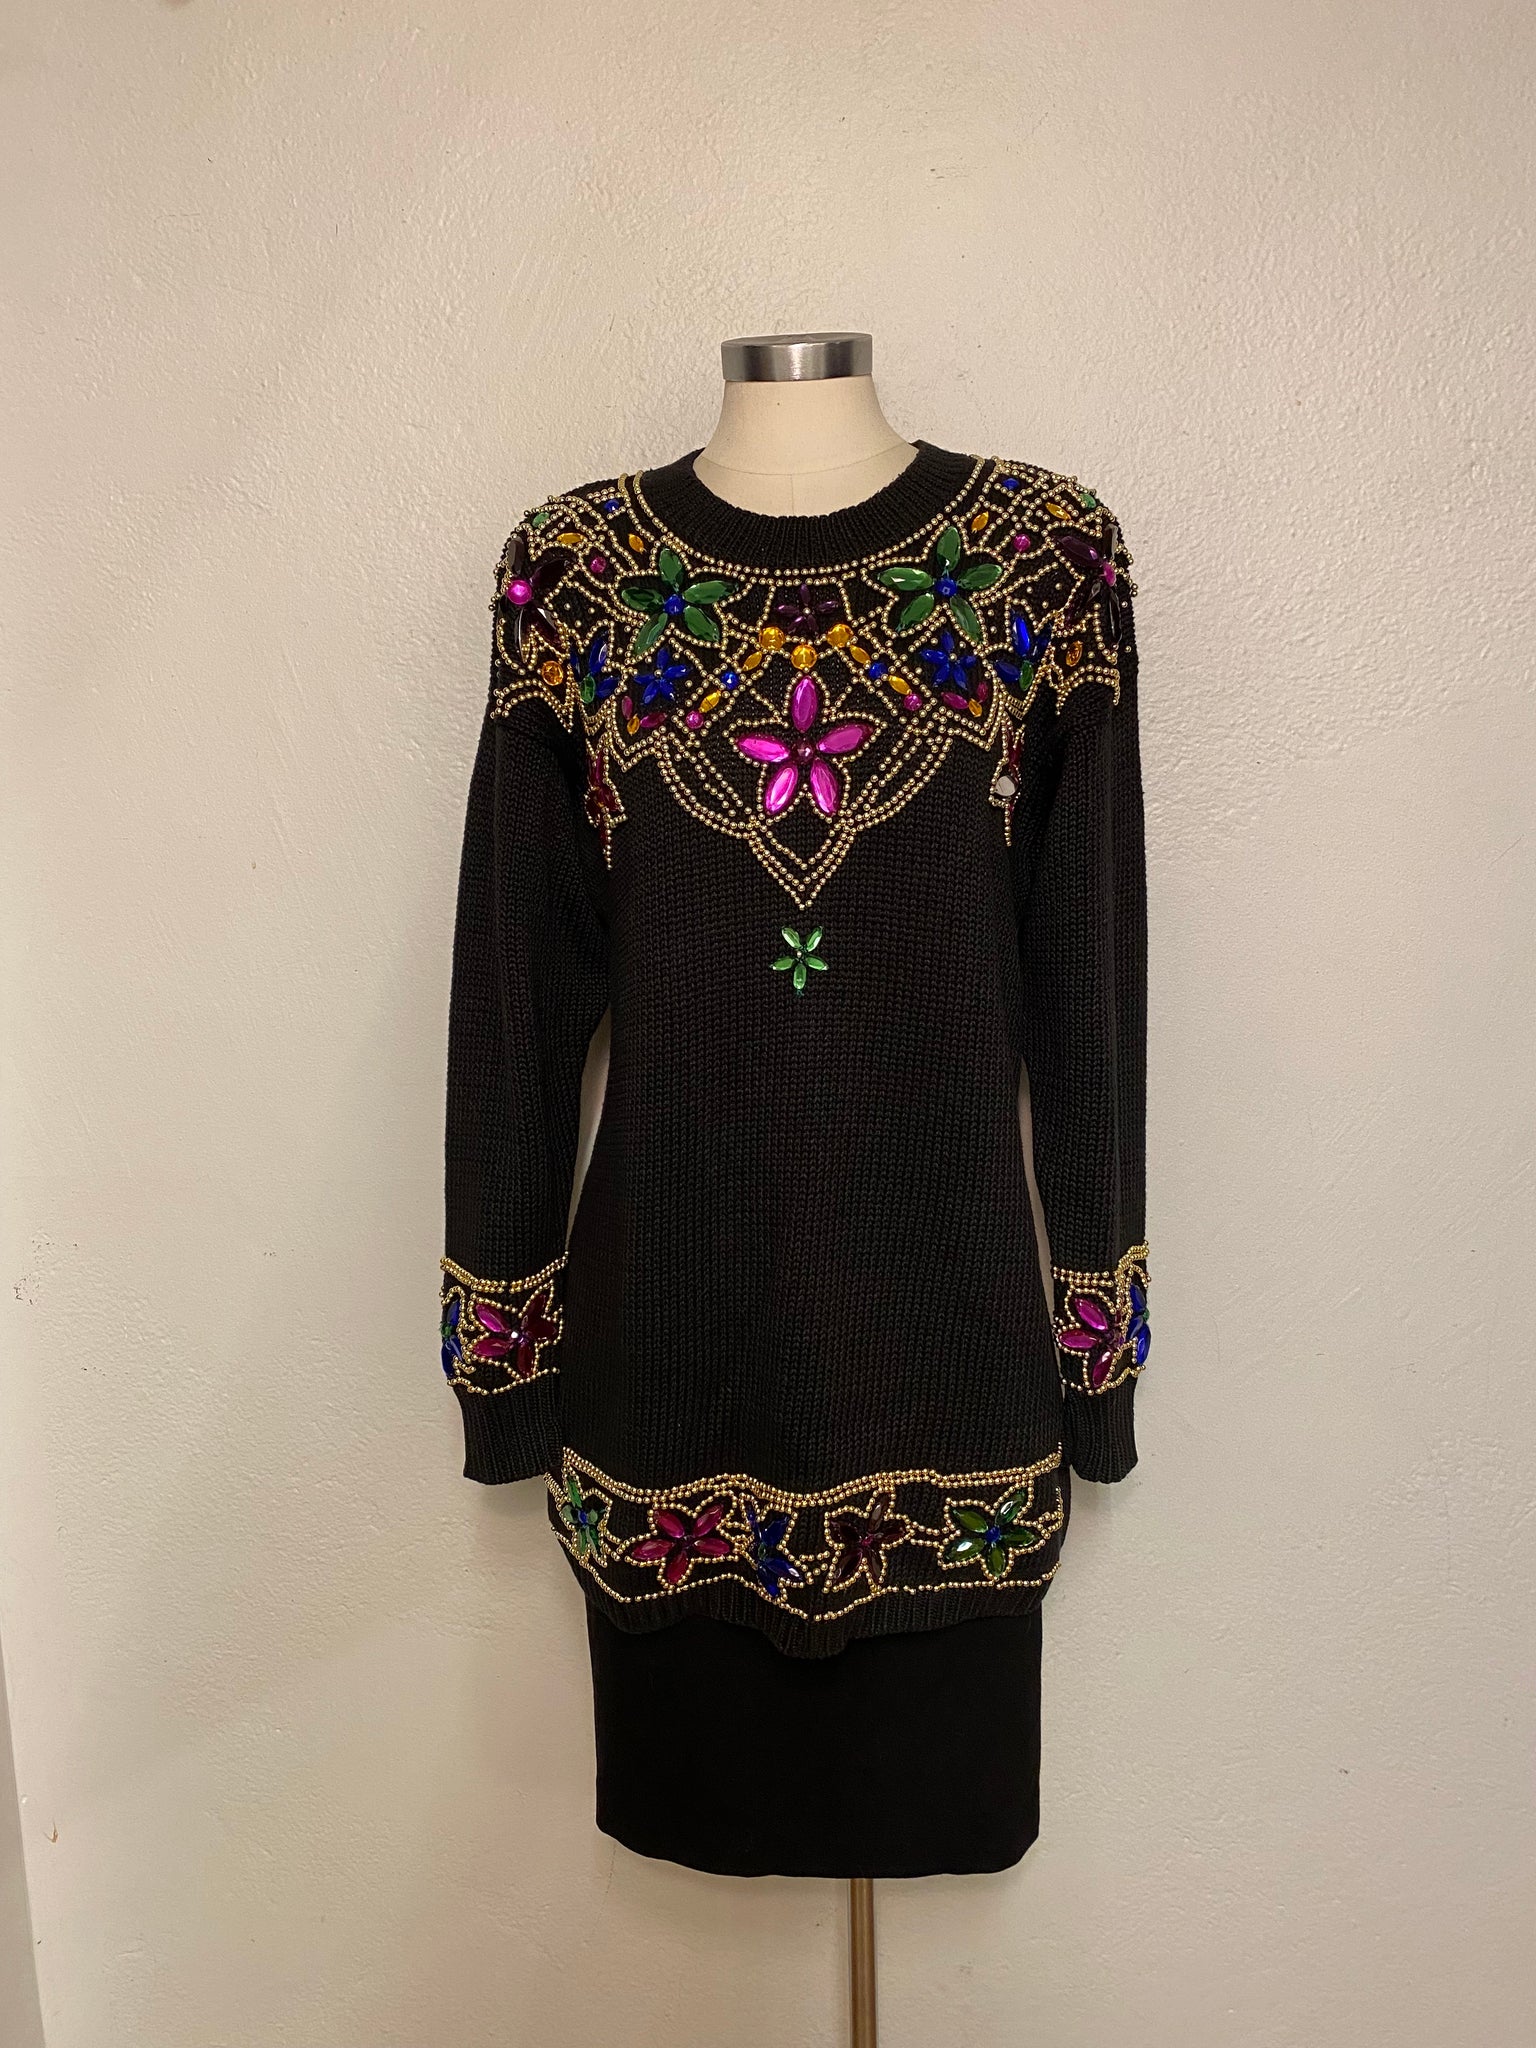 Bedazzled Knit Tunic, S